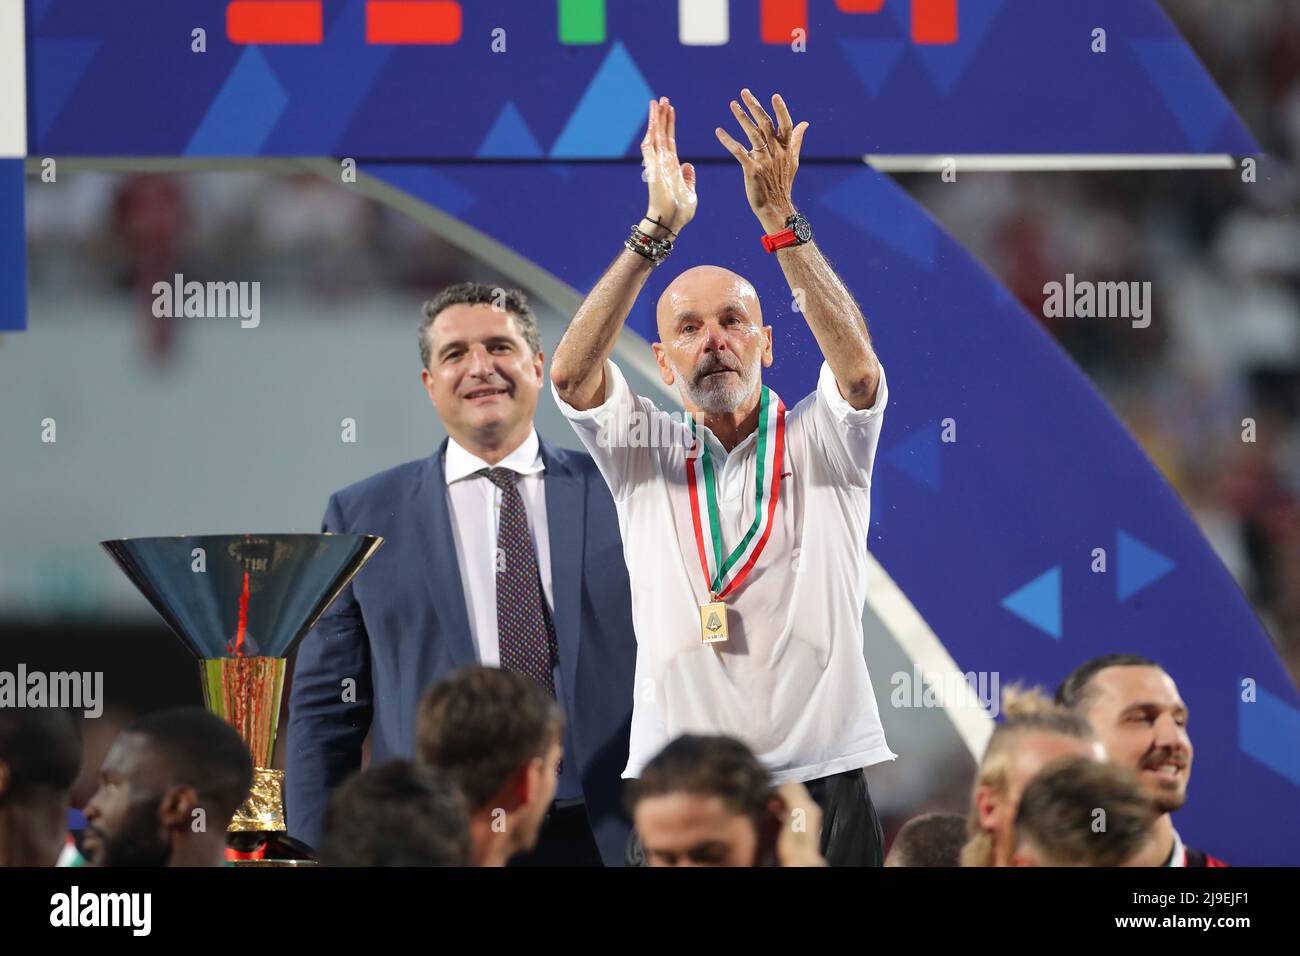 Sassuolo, Italy. 22nd May, 2022. Luigi De Siervo Managing Director of Serie A looks on as Stefano Pioli Head coach of AC Milan applauds the crowd from the podium during the trophy presentation following the Serie A match at Mapei Stadium - Cittˆ del Tricolore, Sassuolo. Picture credit should read: Jonathan Moscrop/Sportimage Credit: Sportimage/Alamy Live News Stock Photo